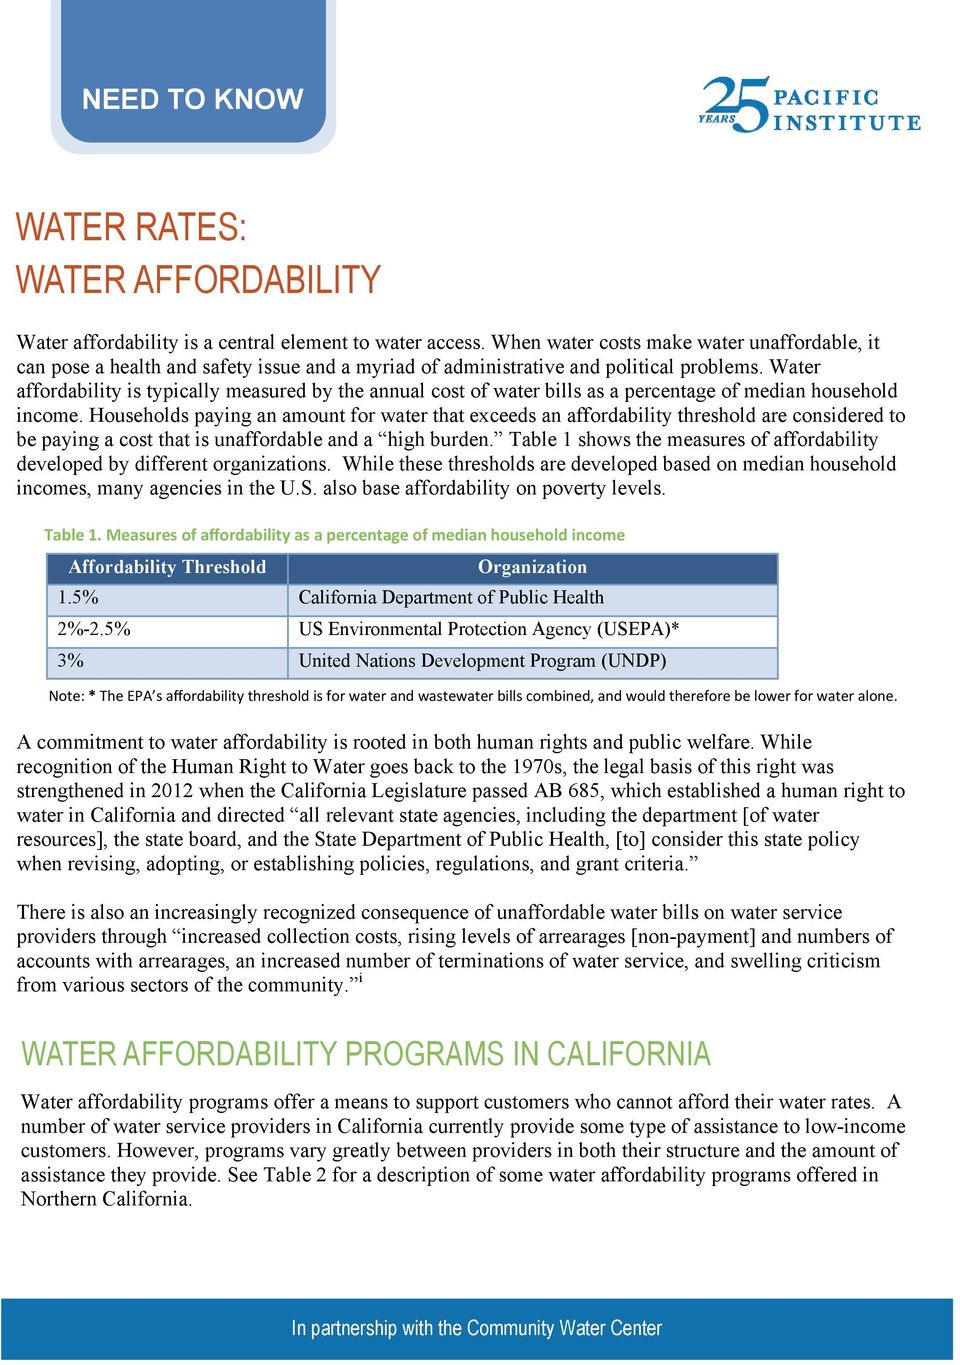 Water affordability is typically measured by the annual cost of water bills as a percentage of median income.